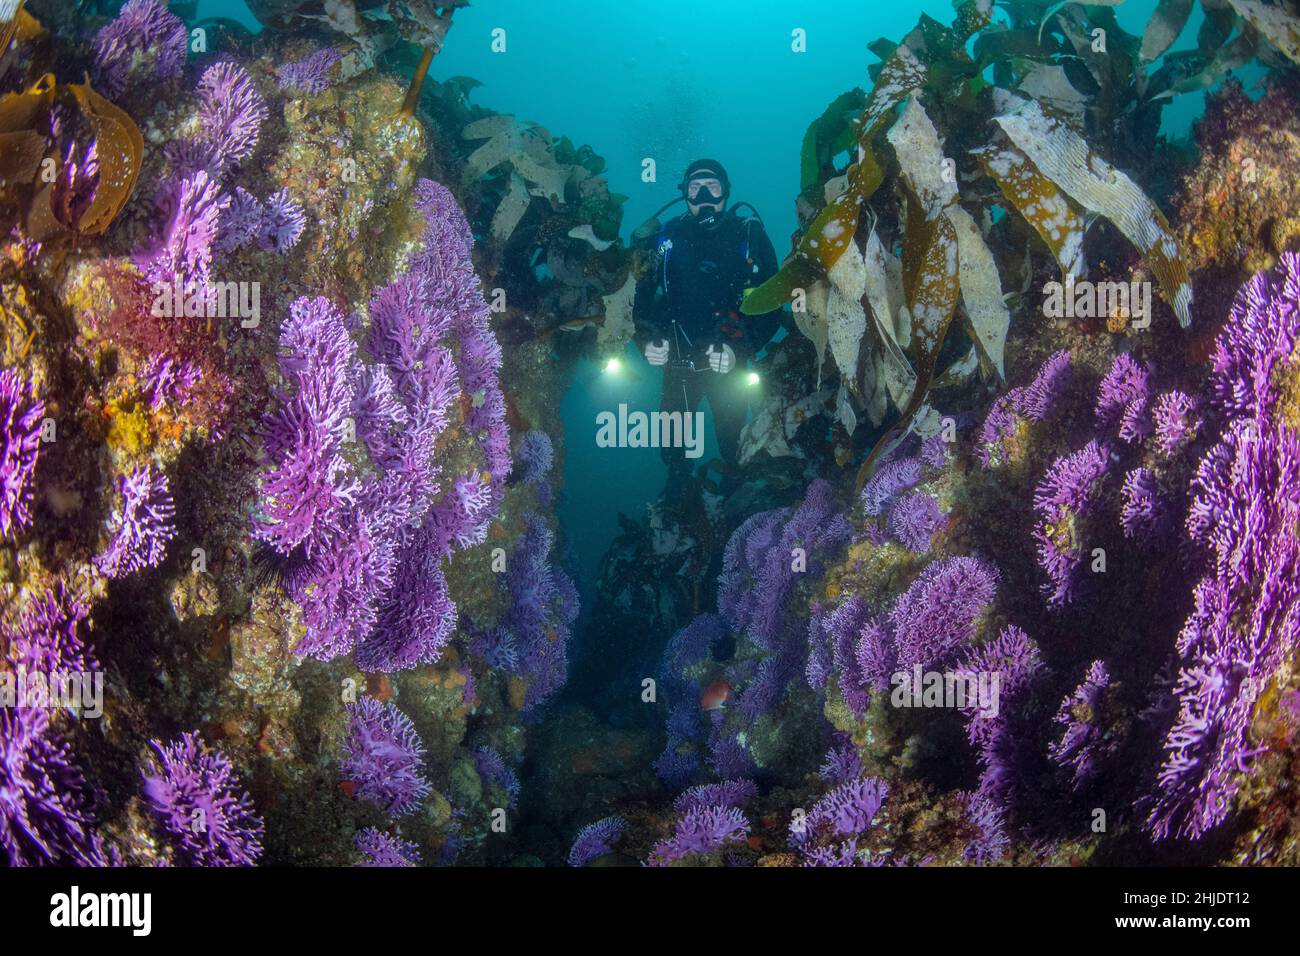 Diver Mike Pizzi explores among colonies of purple hydracoral,  Stylaster californicus, and giant kelp, Macrocystis pyrifera.  Farnsworth Bank, Catali Stock Photo